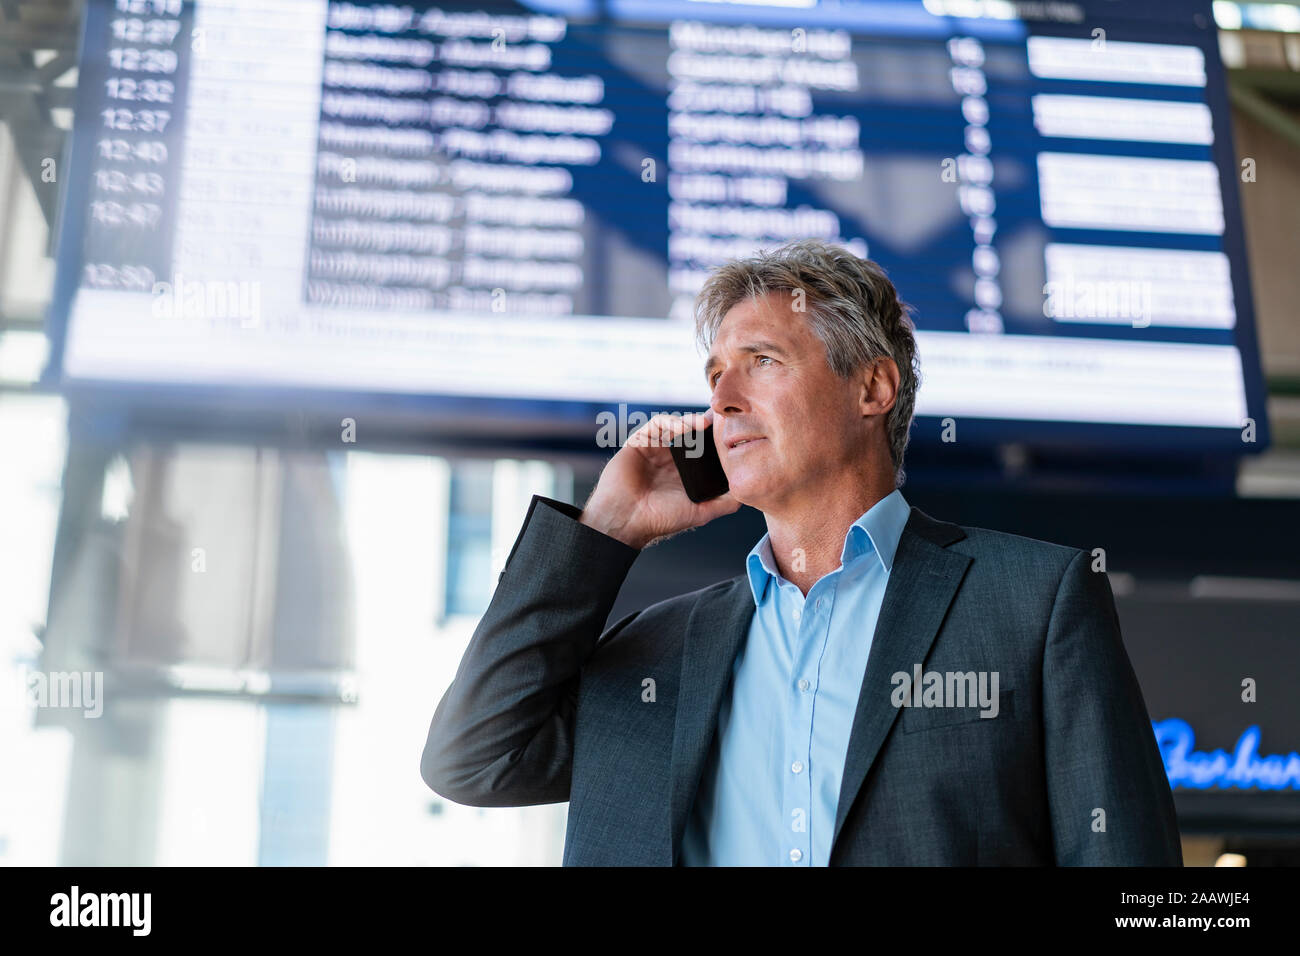 Mature businessman on the phone at the station Stock Photo